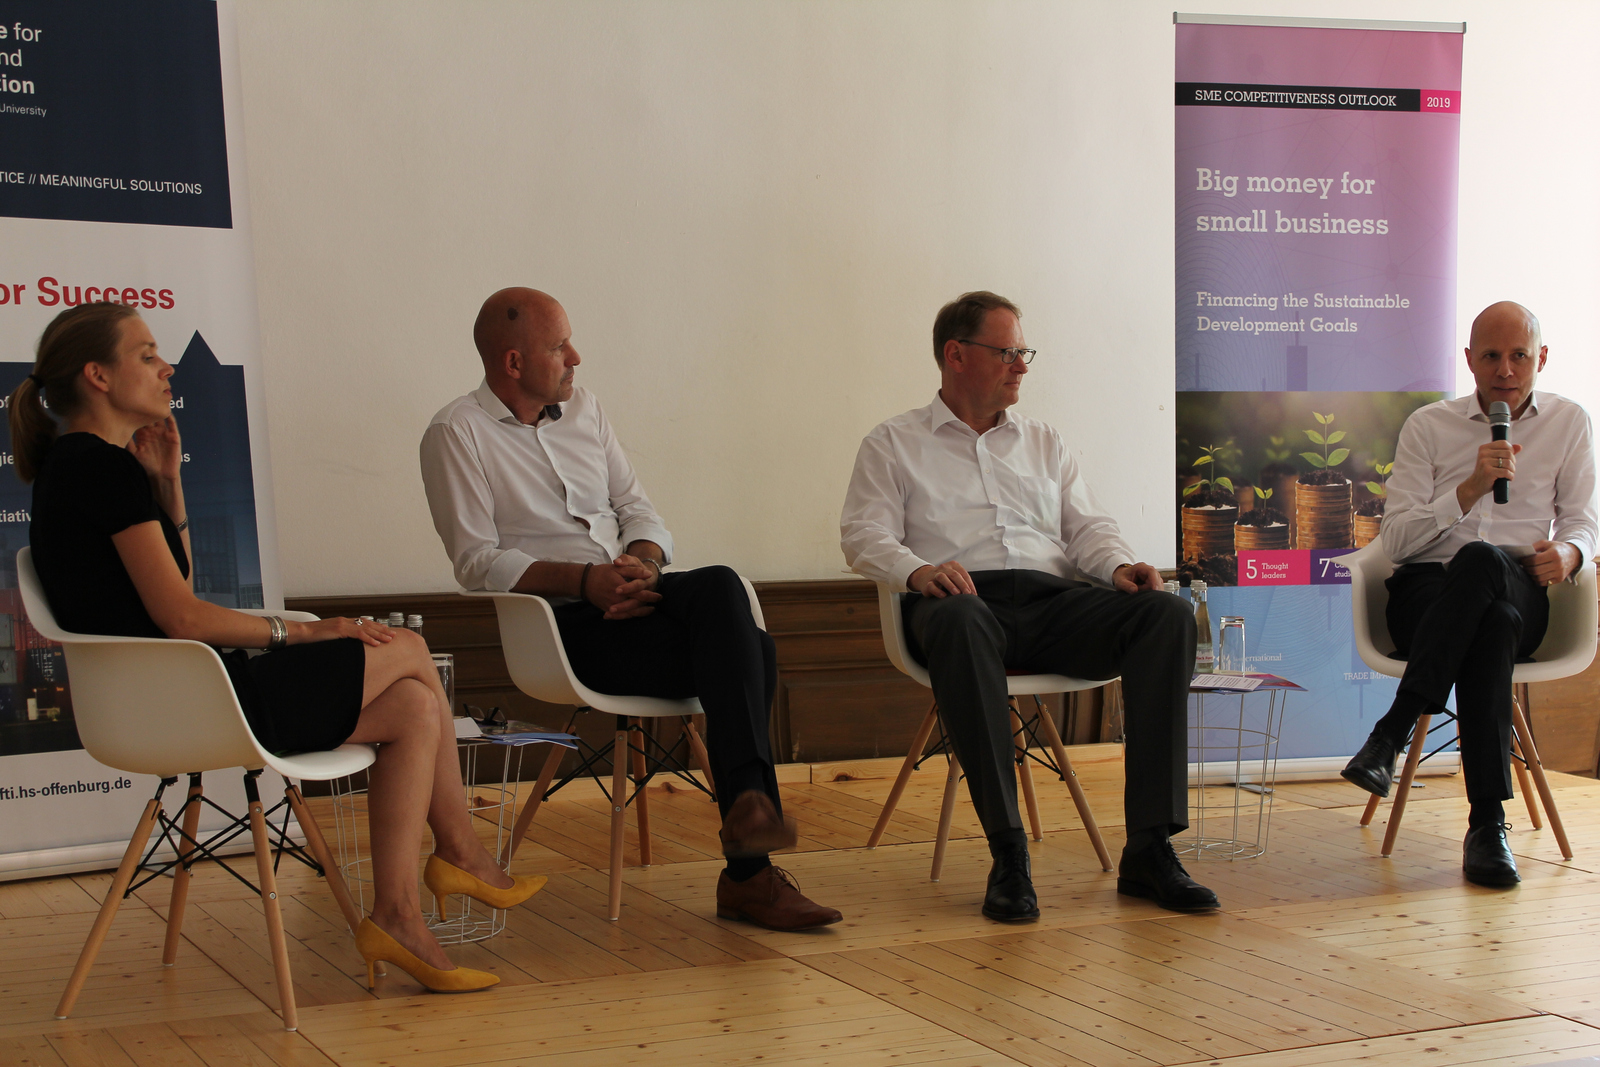 Dr. Julia Spies, Dr. Frank Stetter, Helmut Becker and Prof. Andreas Klasen (from left) discussed the importance of investments for small and medium-sized enterprises in the region